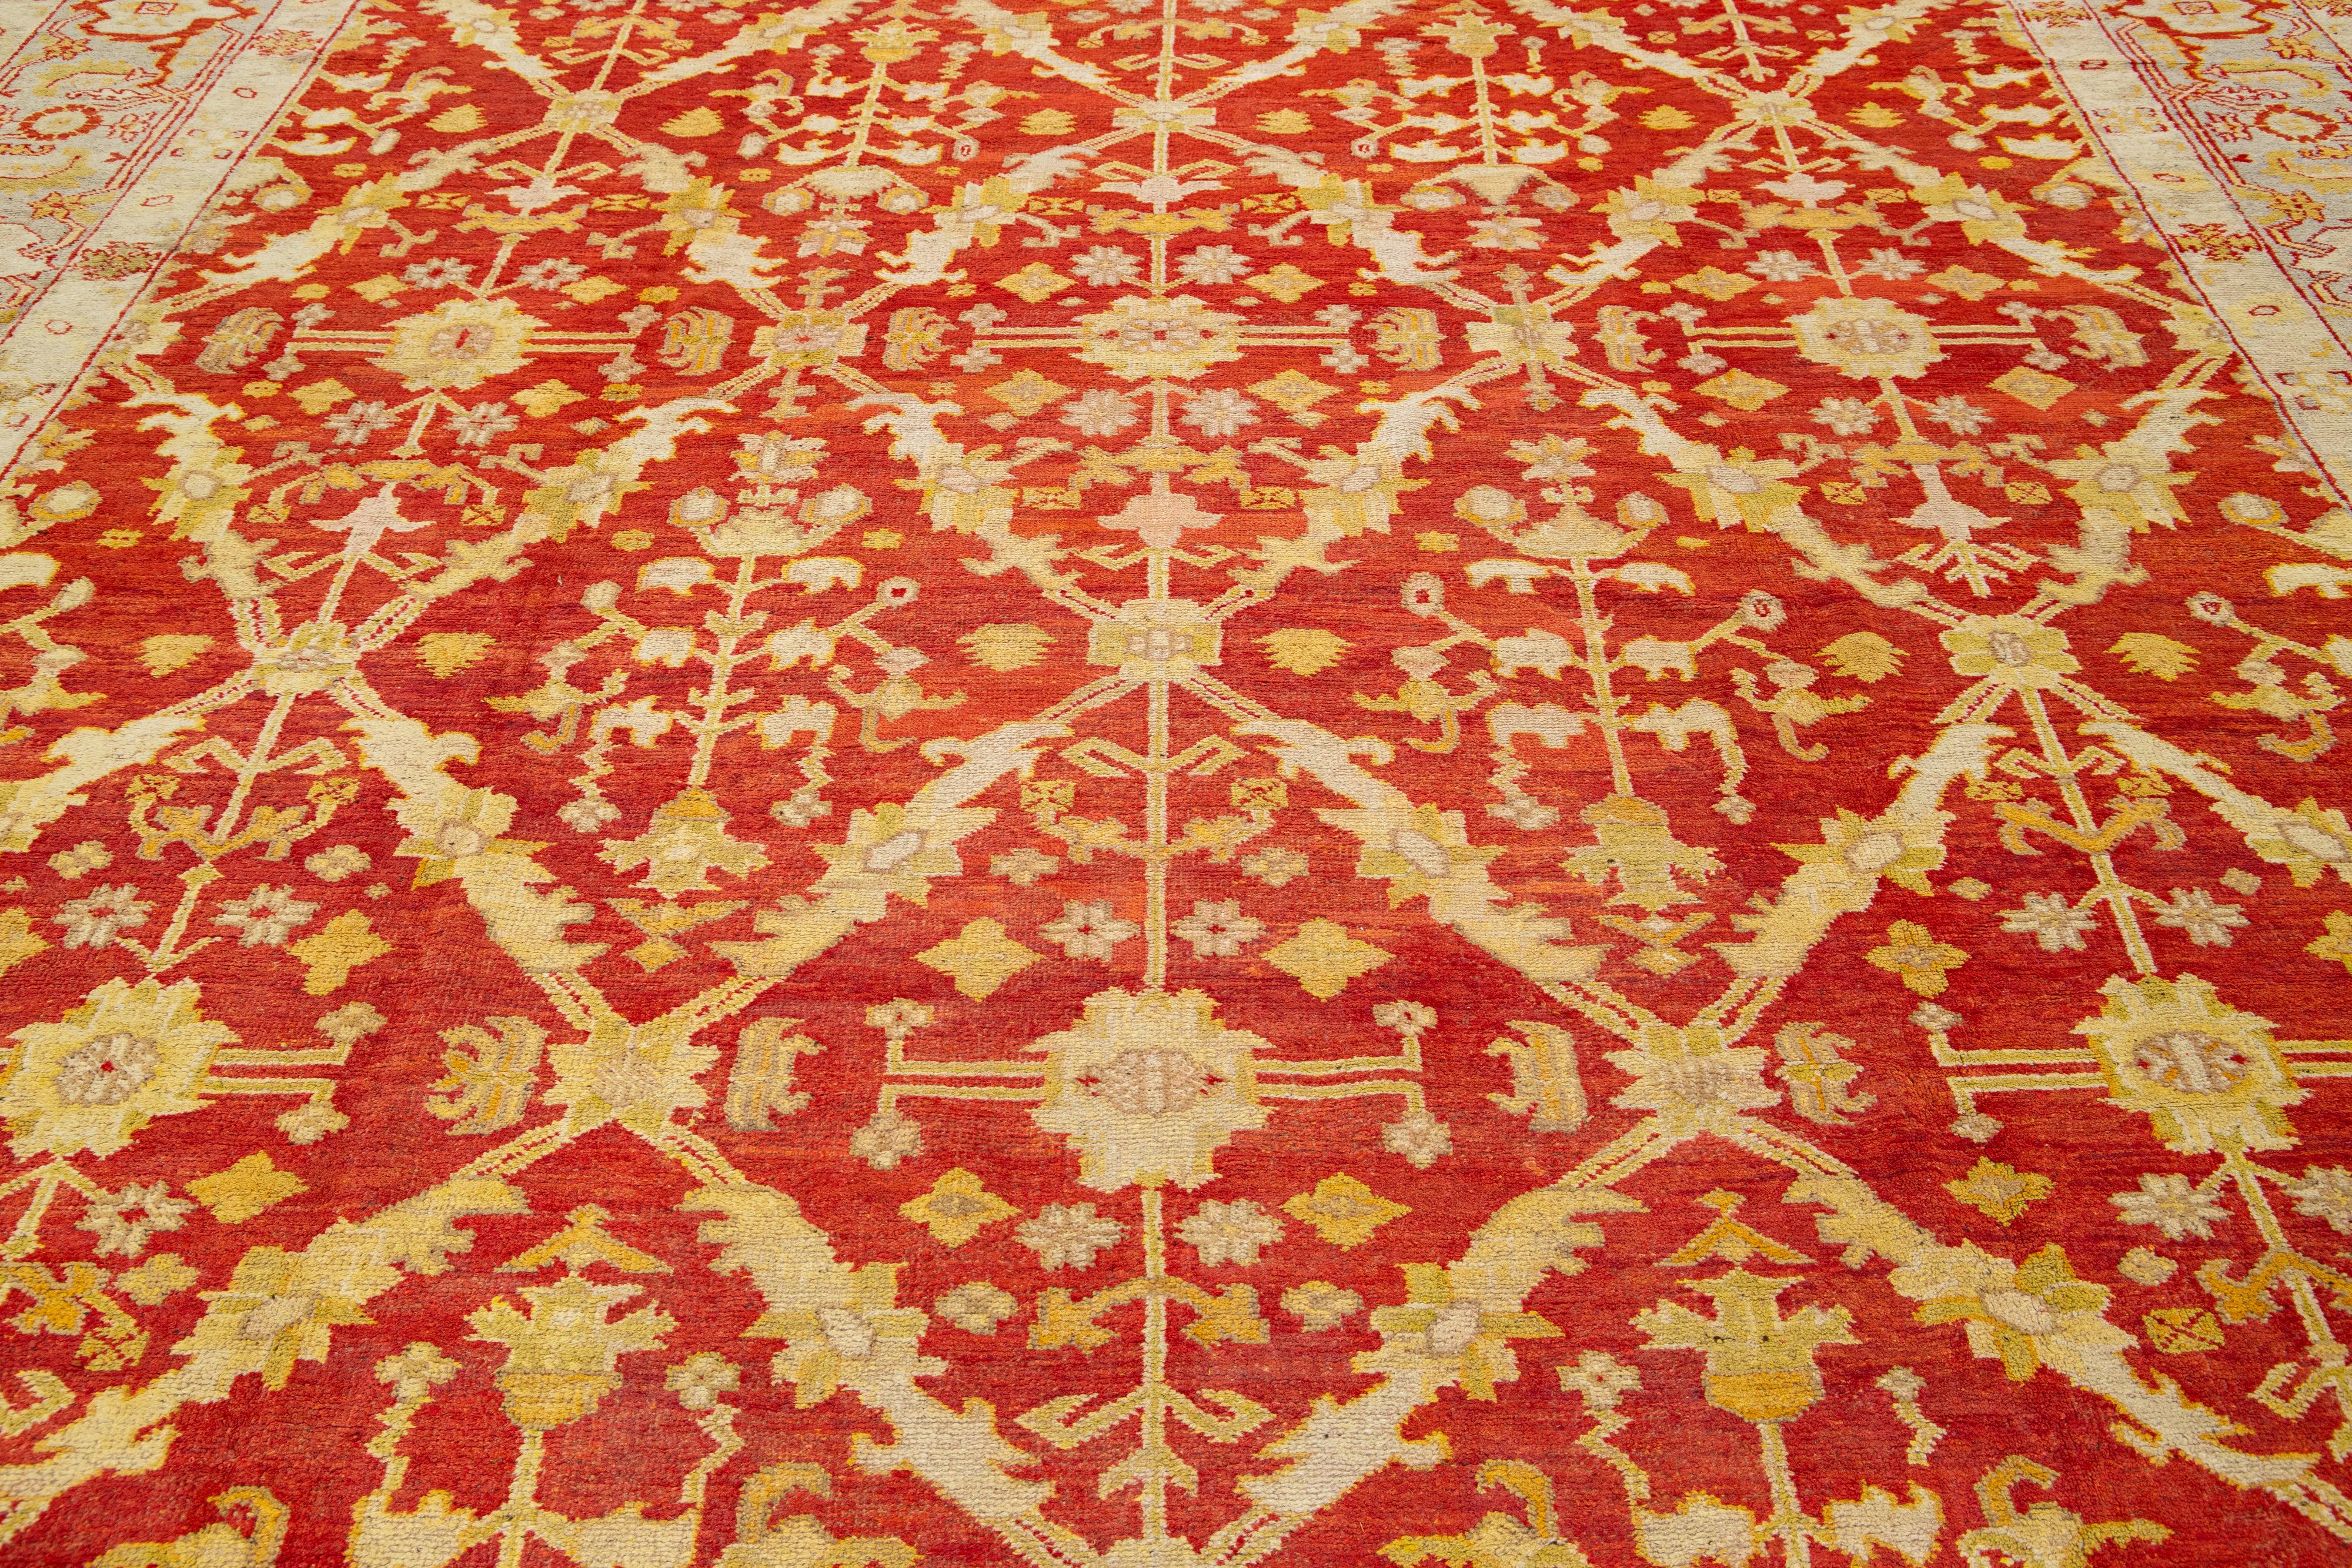 Handmade Red Turkish Oushak Wool Rug Featuring a Floral Pattern From The 1880's For Sale 2